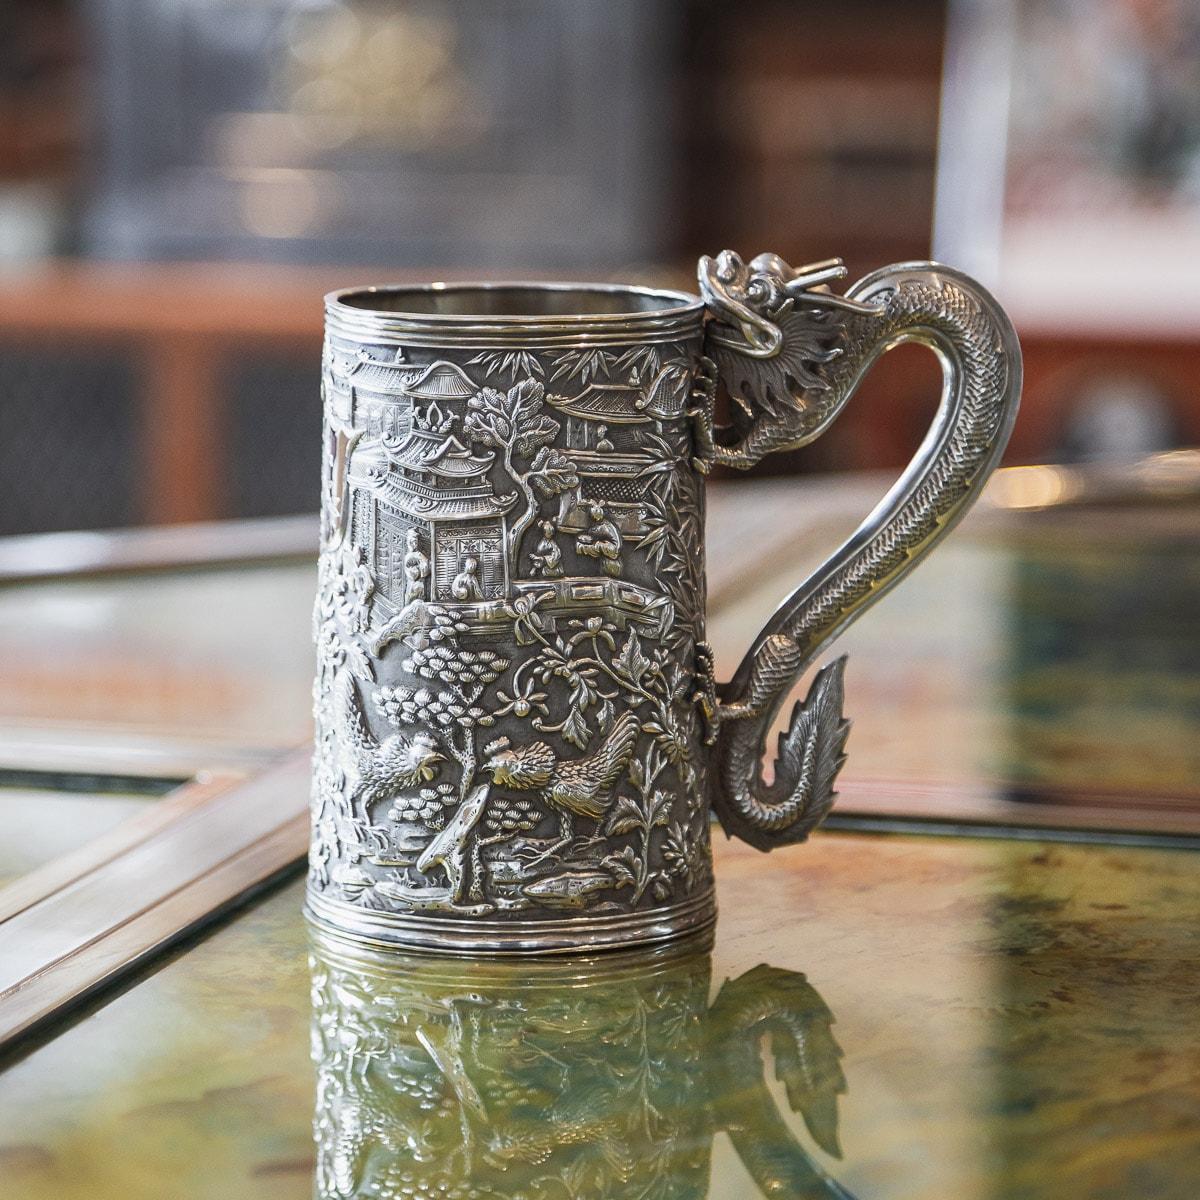 Antique late 19th century Chinese export solid silver mug, of traditional shape and large Size, the body is embossed with beautiful nobility scenes, perched cockerels amongst foliage, double walled, the front centering with an engraved shield shaped